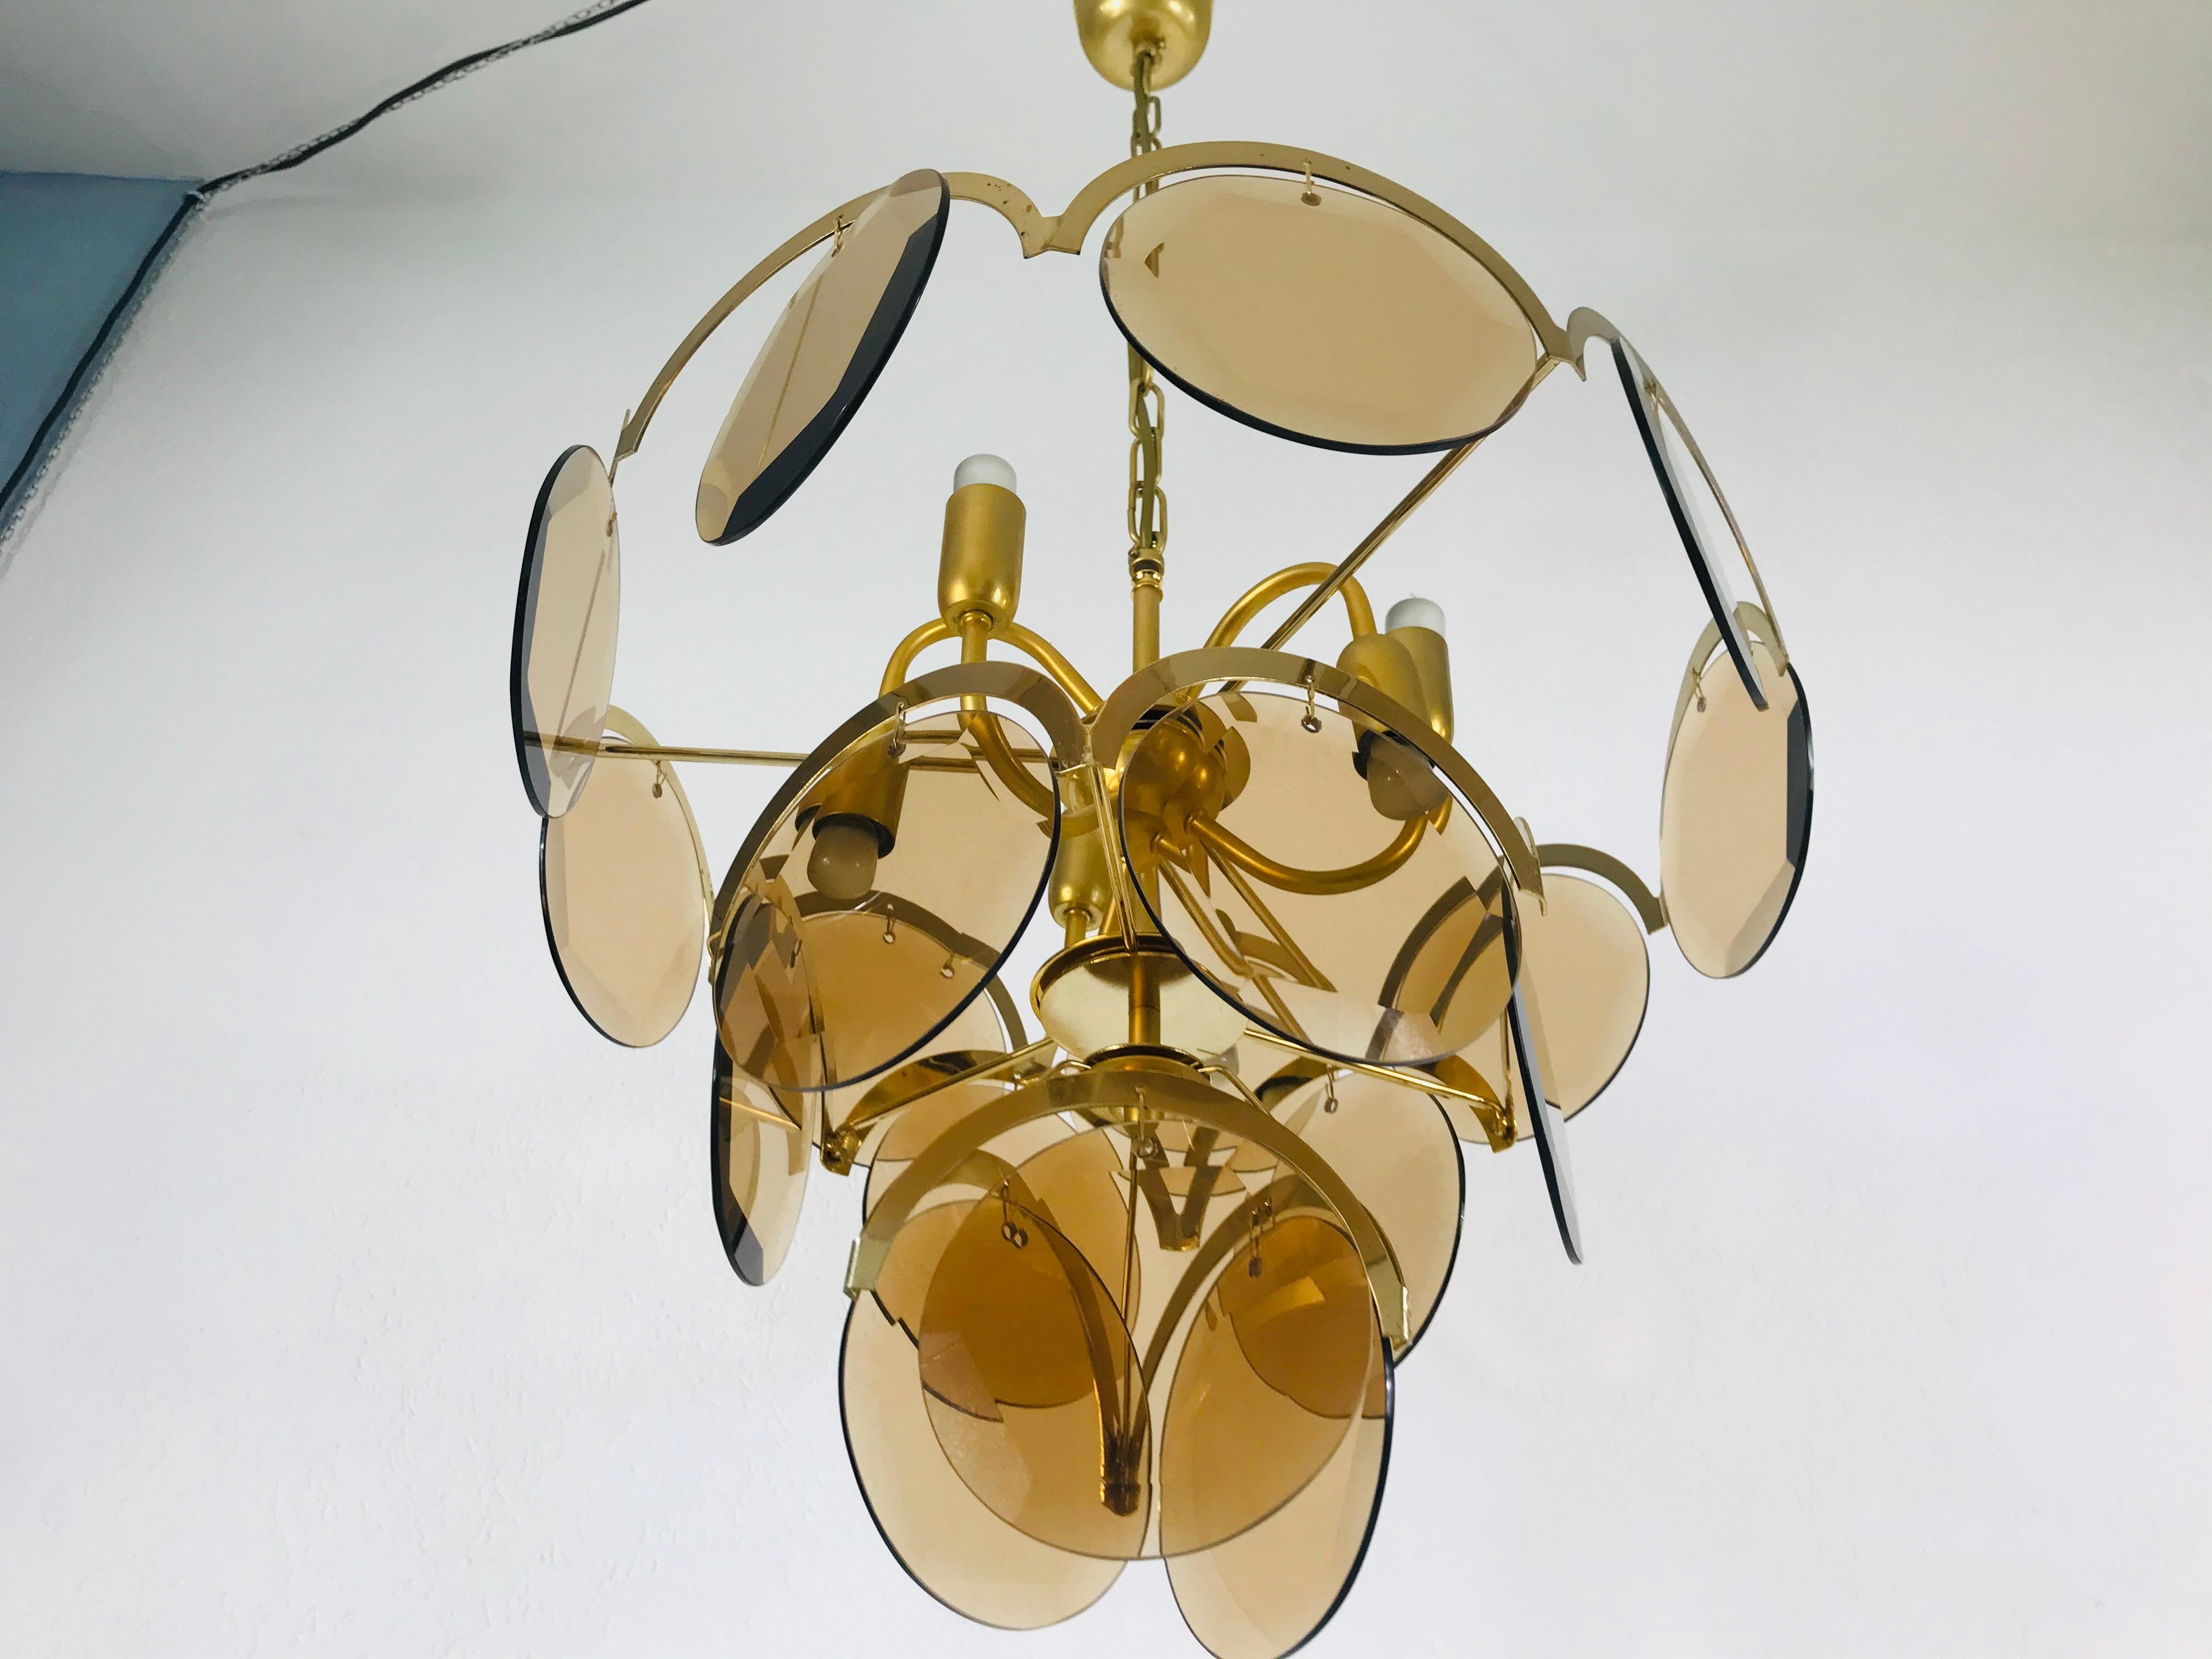 Midcentury Three-Tier Brass and Glass Chandelier by Vistosi, 1960s For Sale 2